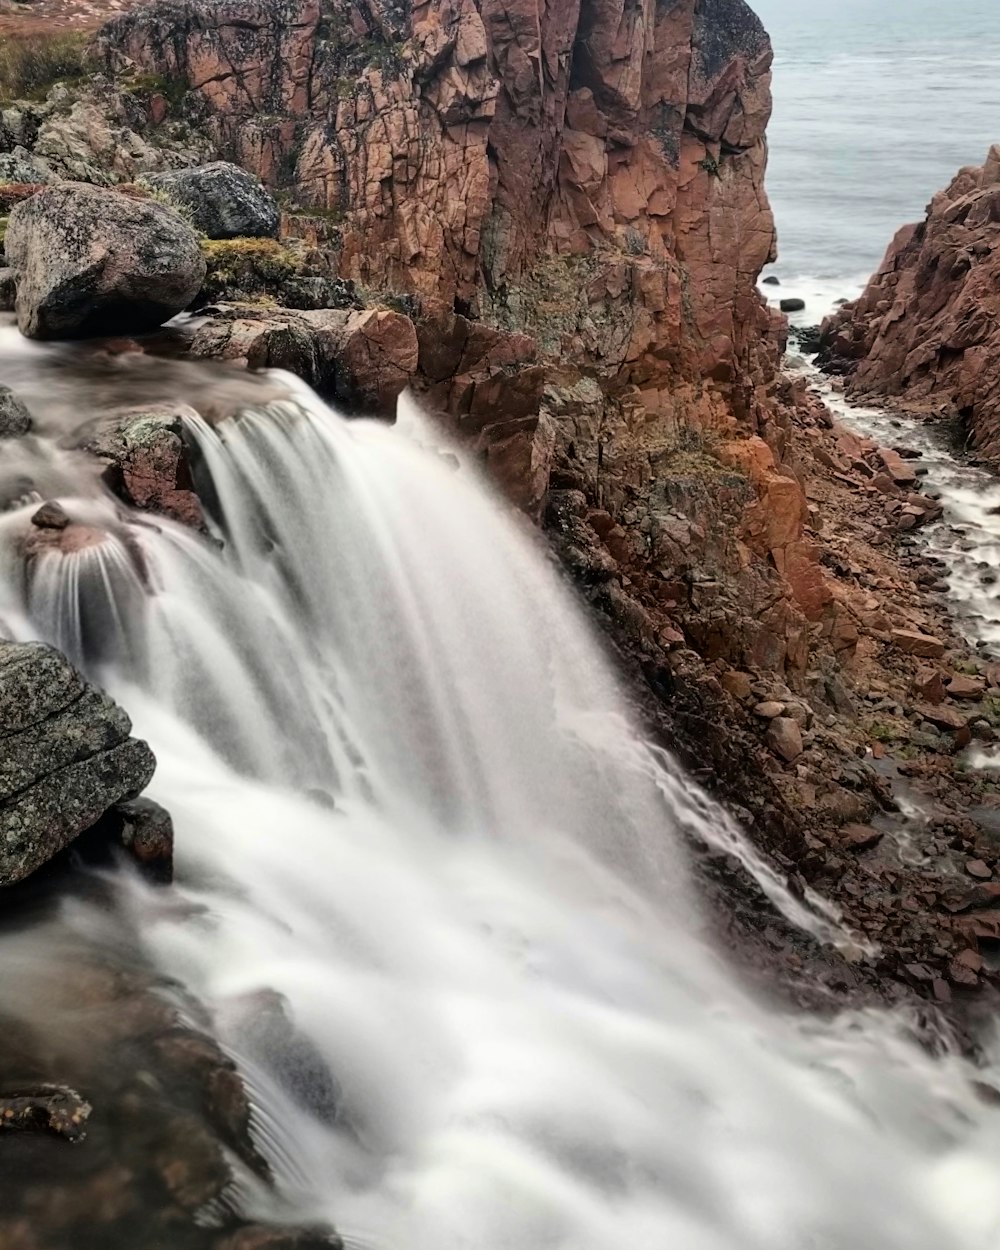 a large waterfall flowing over rocks into the ocean